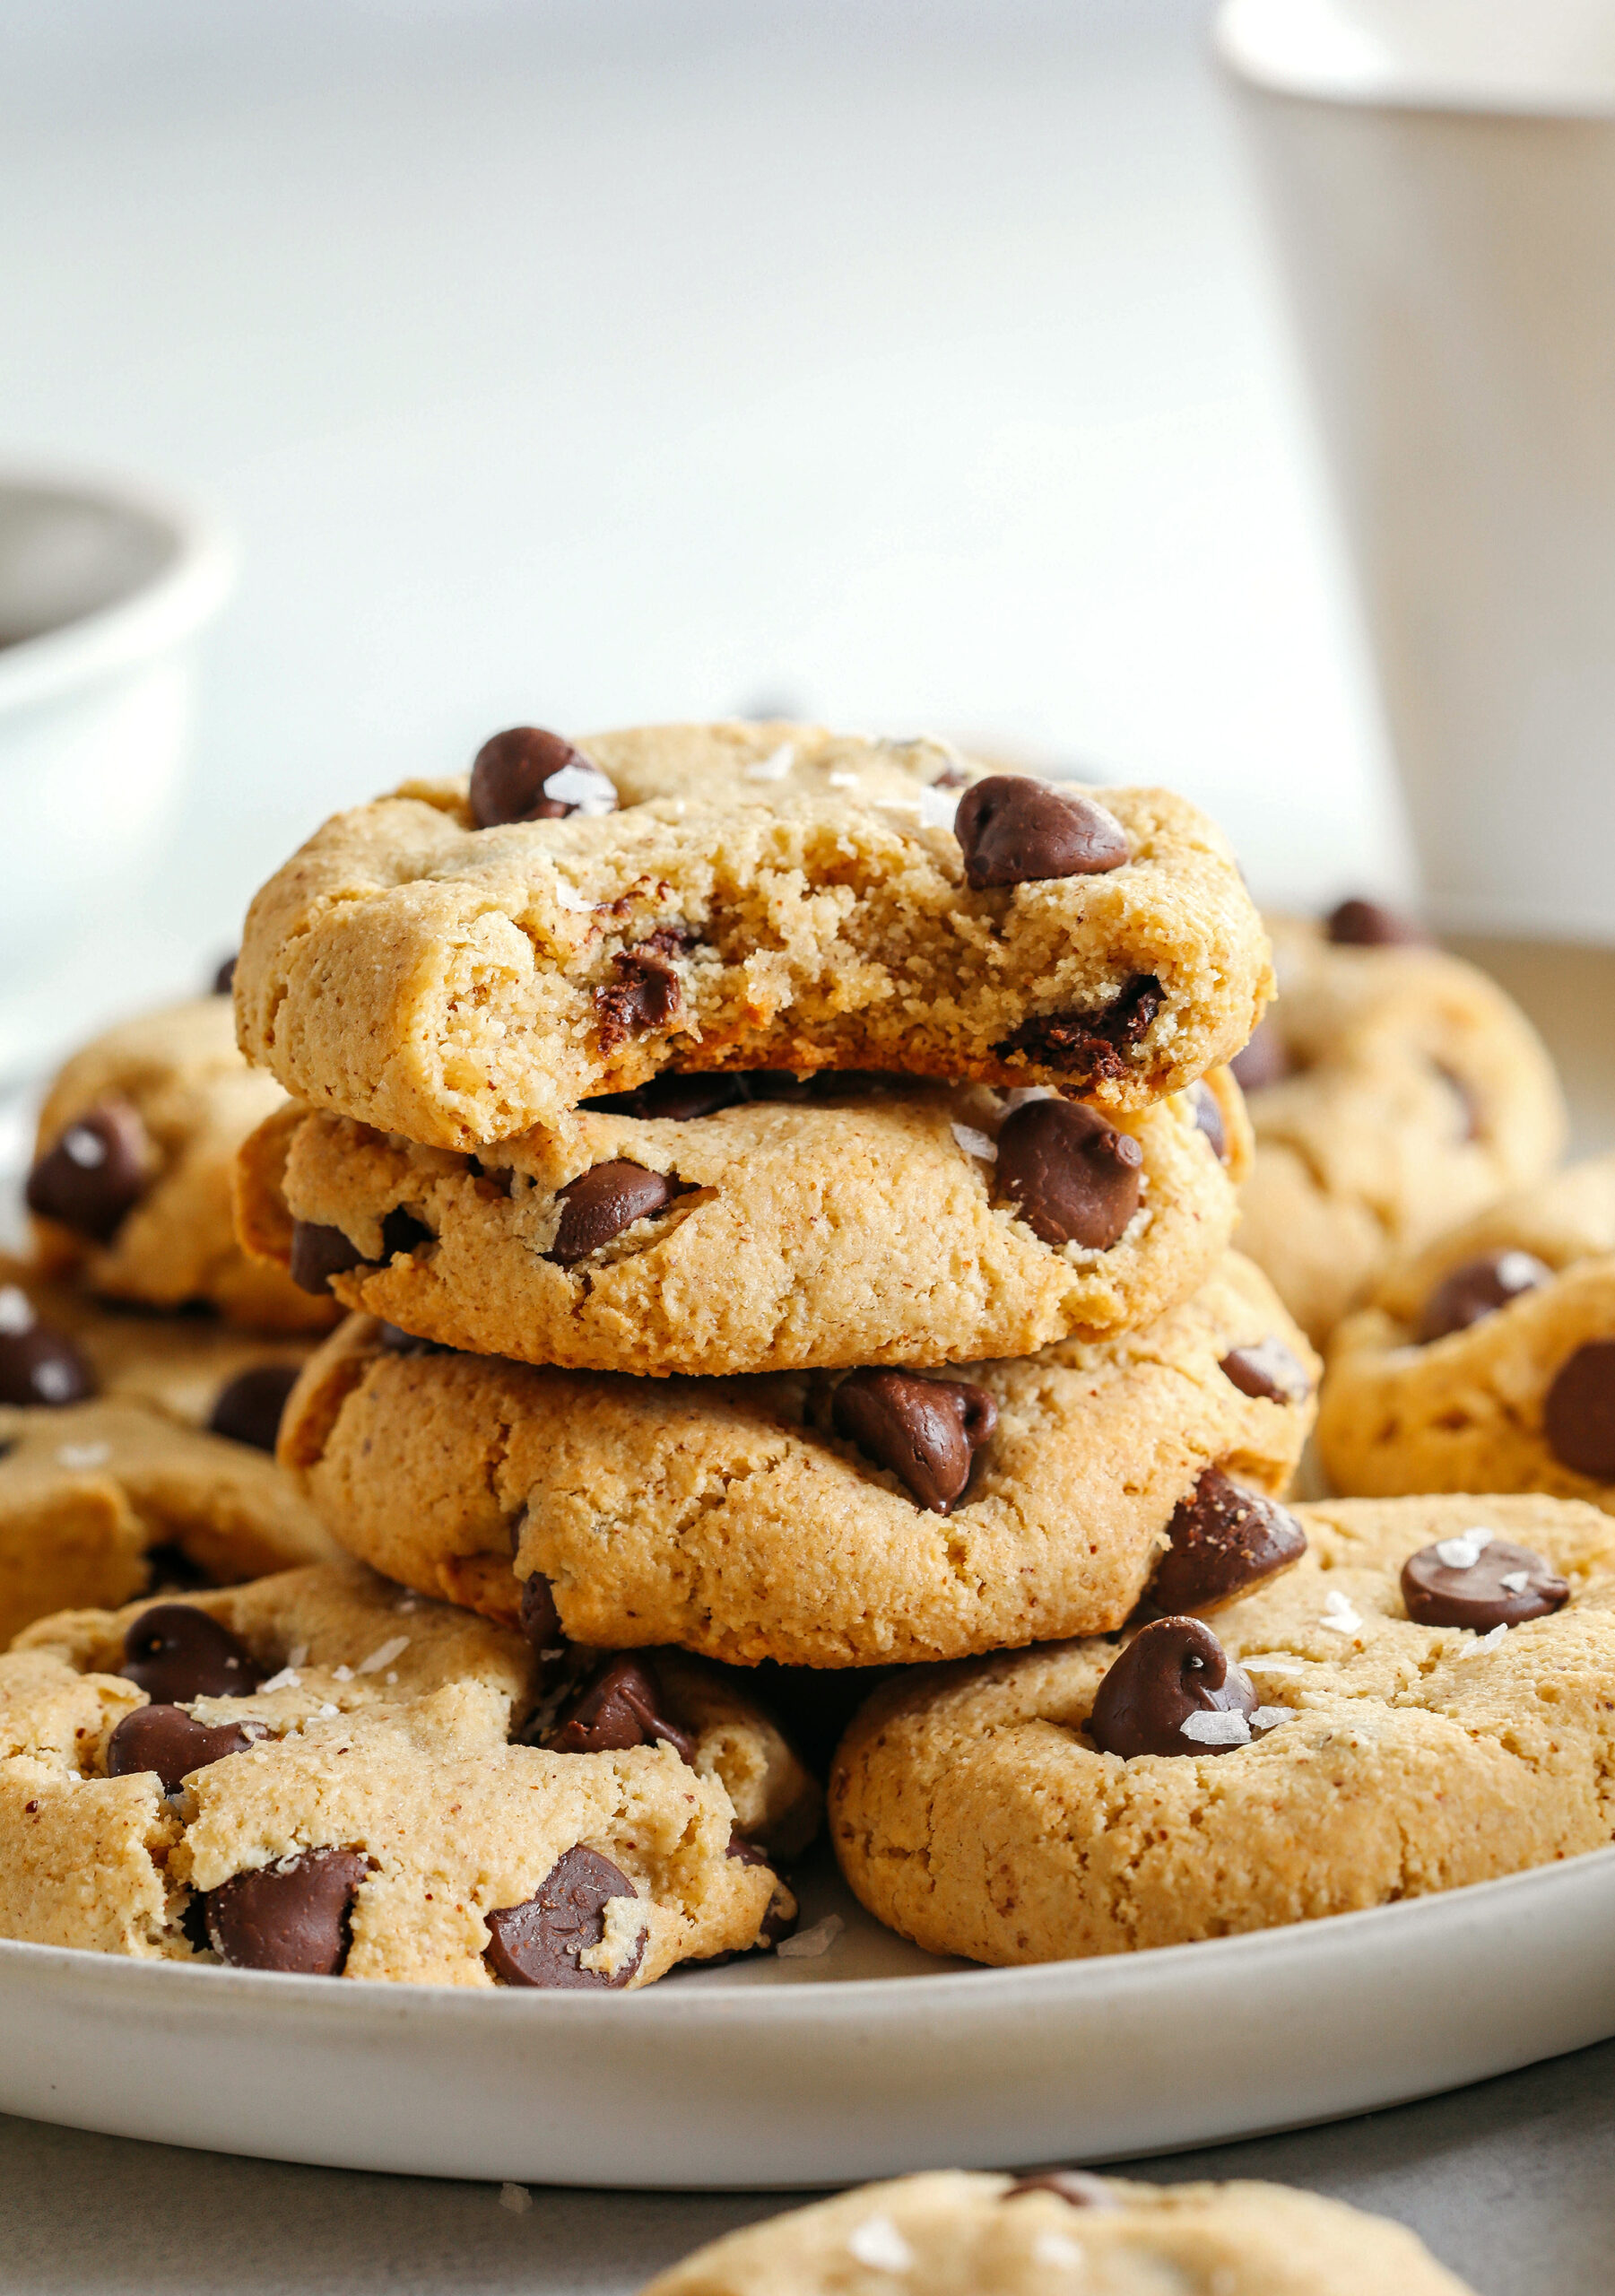 Healthy Chocolate Chip Cookies that are soft, chewy, and absolutely delicious with gooey chocolate chips in every bite!  These gluten-free cookies are made with wholesome ingredients and use zero oil or refined sugar for the perfect sweet treat everyone will enjoy!